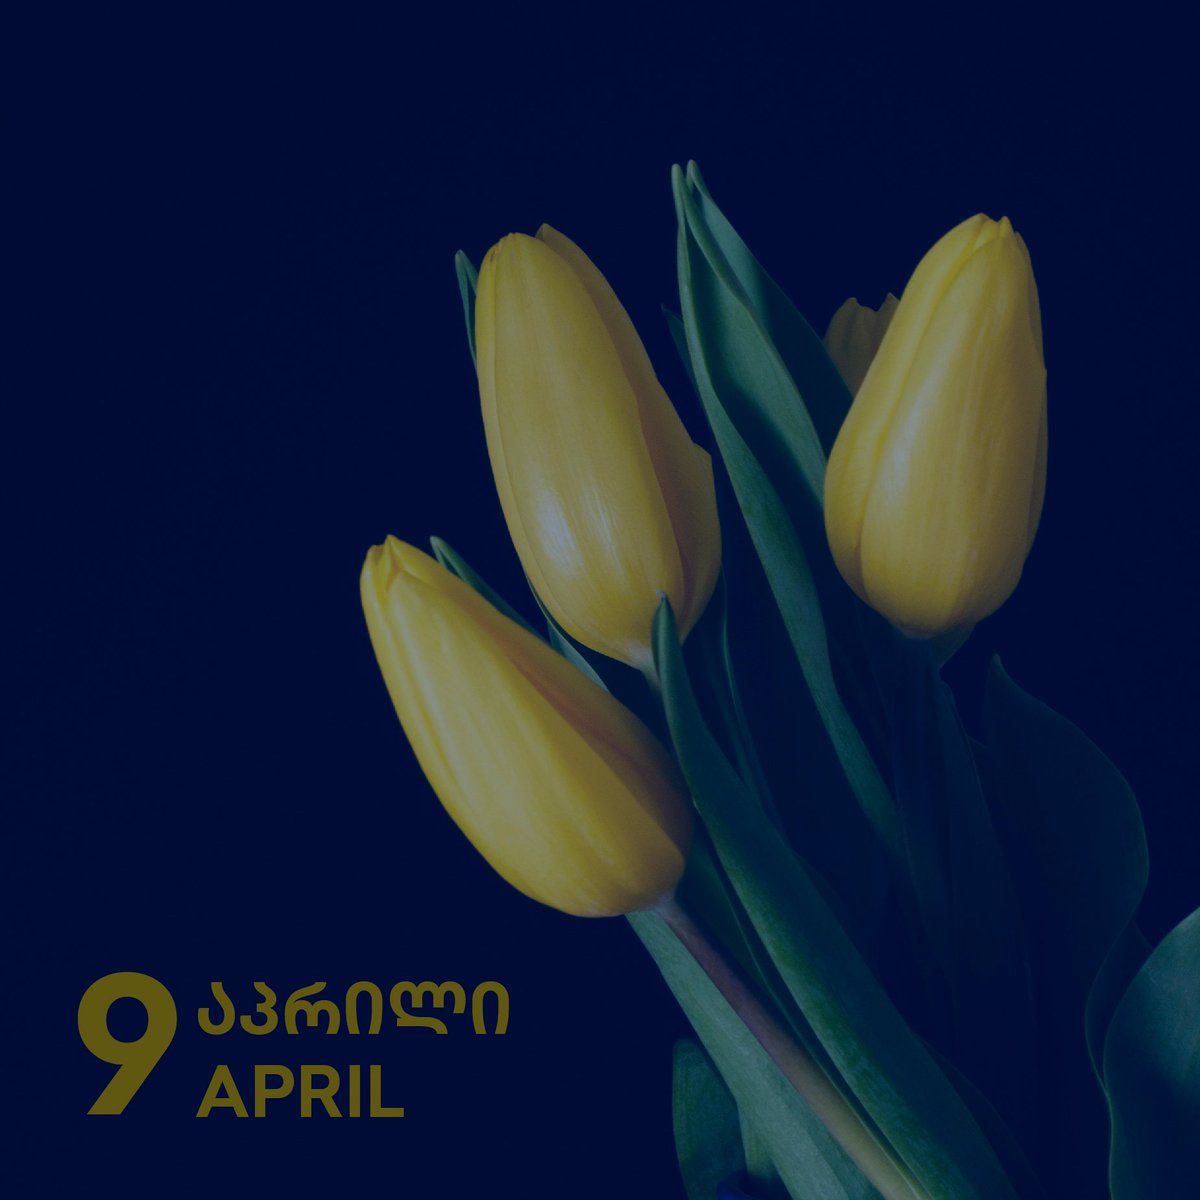 Georgia paid a high price on 9 April 1989 while being liberated from the Soviet rule. Many Georgians have sacrificed their lives for independence. We honour their legacy.